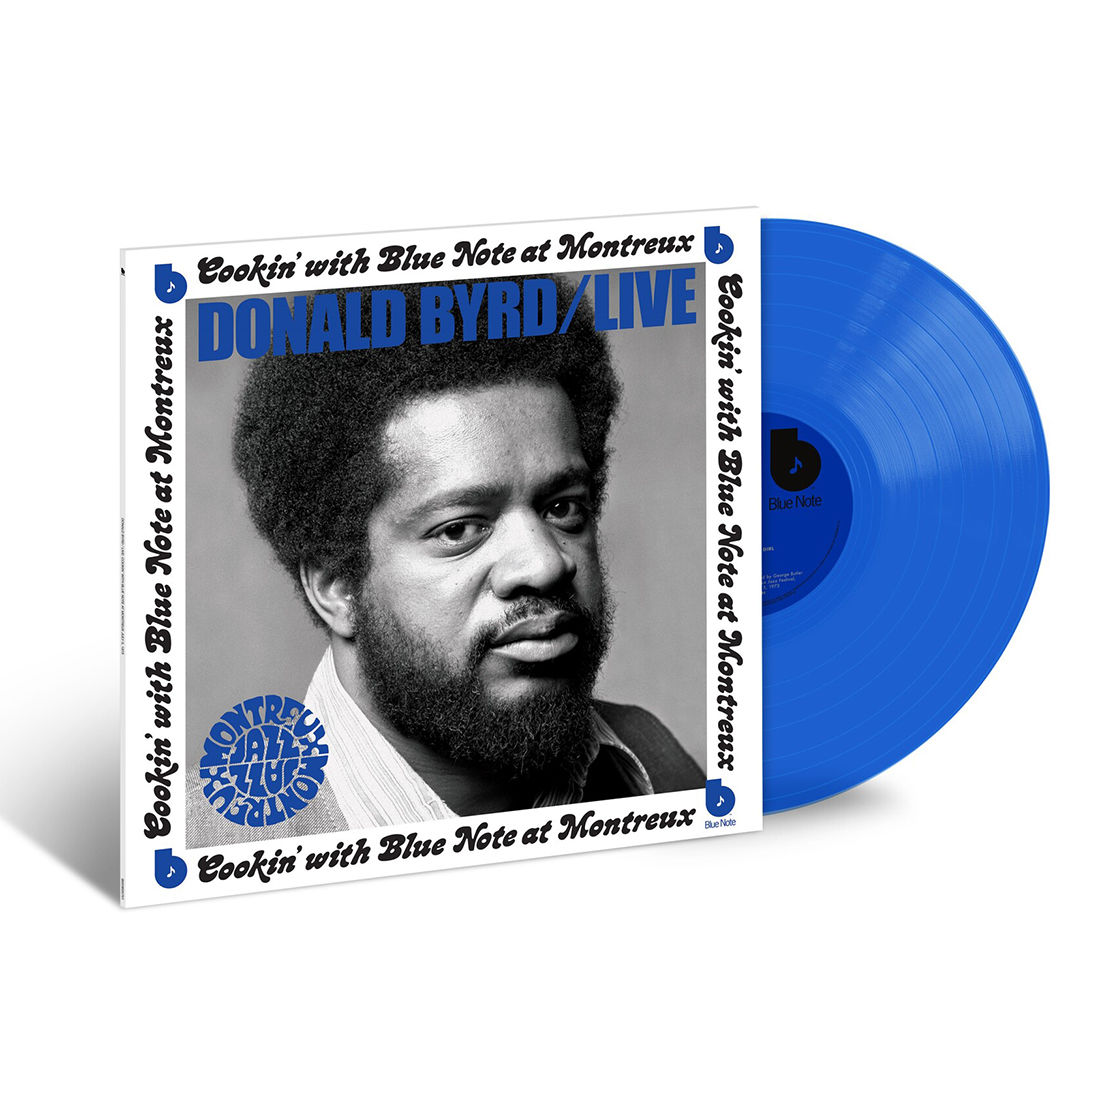 Live: Cookin' with Blue Note at Montreux: Exclusive Blue LP